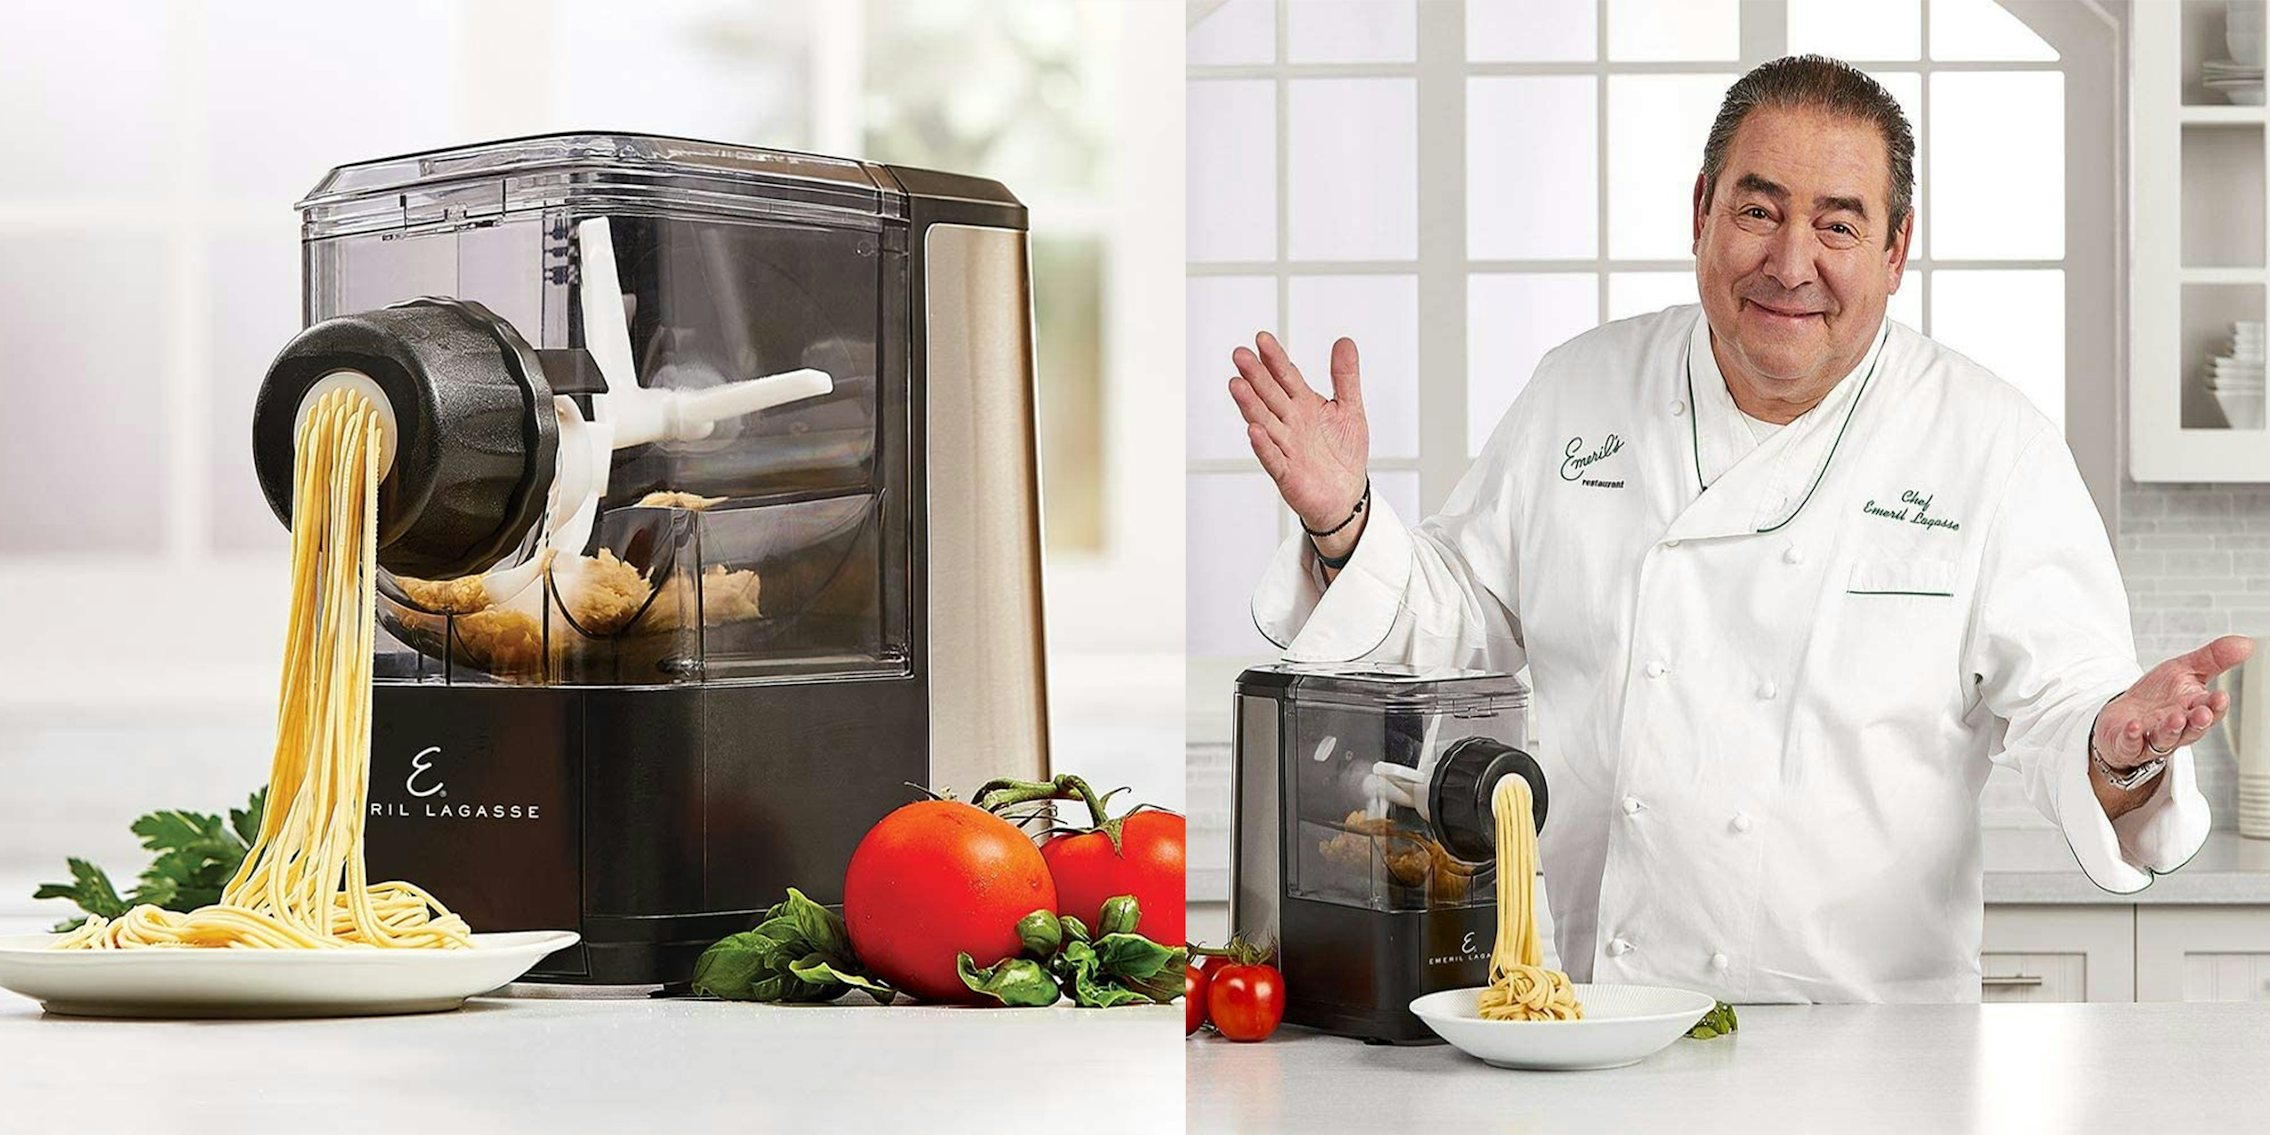 EMERIL LAGASSE Pasta & Beyond, Automatic Pasta and Noodle Maker